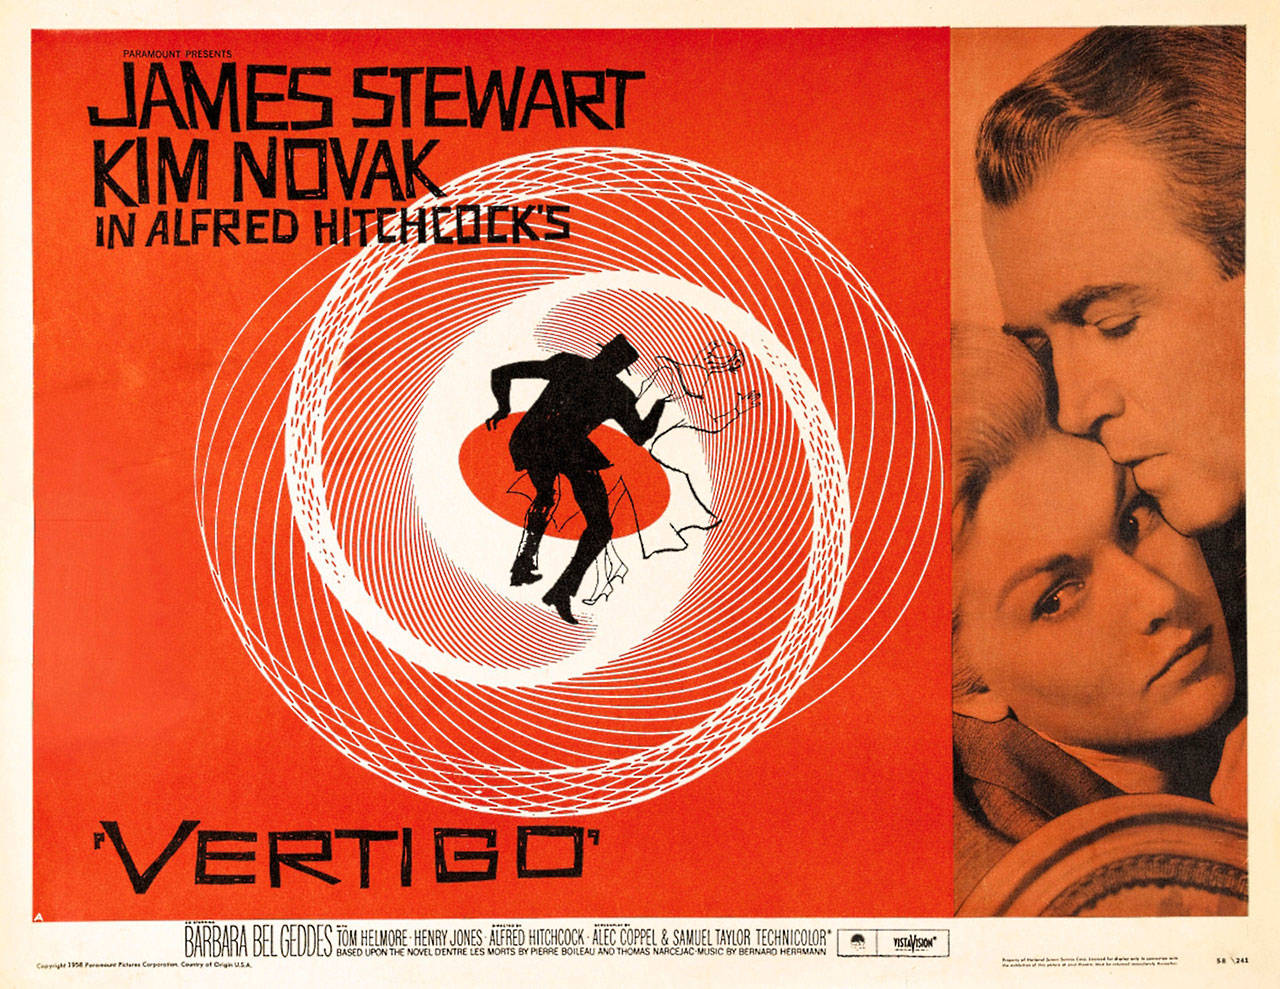 Image courtesy of Universal Pictures | The classic Alfred Hitchcock film noir thriller “Vertigo” (1958) will return to the big screen at Bainbridge Cinemas for a special 60th anniversary screening at 7 p.m. Wednesday, March 21.